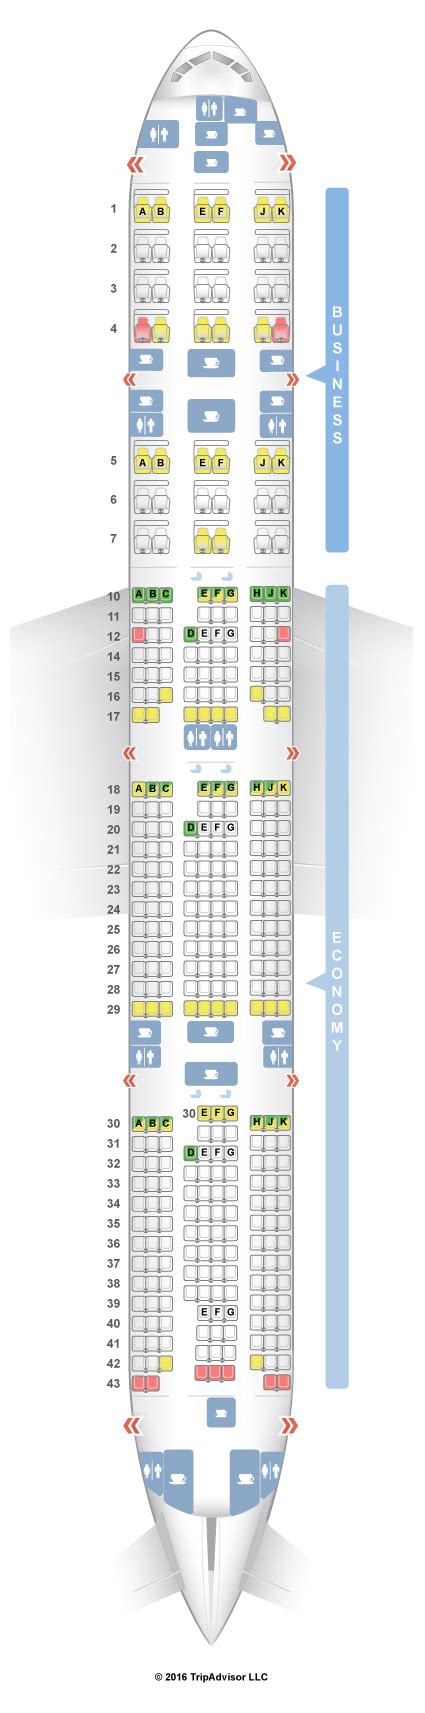 Seat map for qatar airways. For your next Qatar Airways flight, use this seating chart to get the most comfortable seats, legroom, and recline on . 